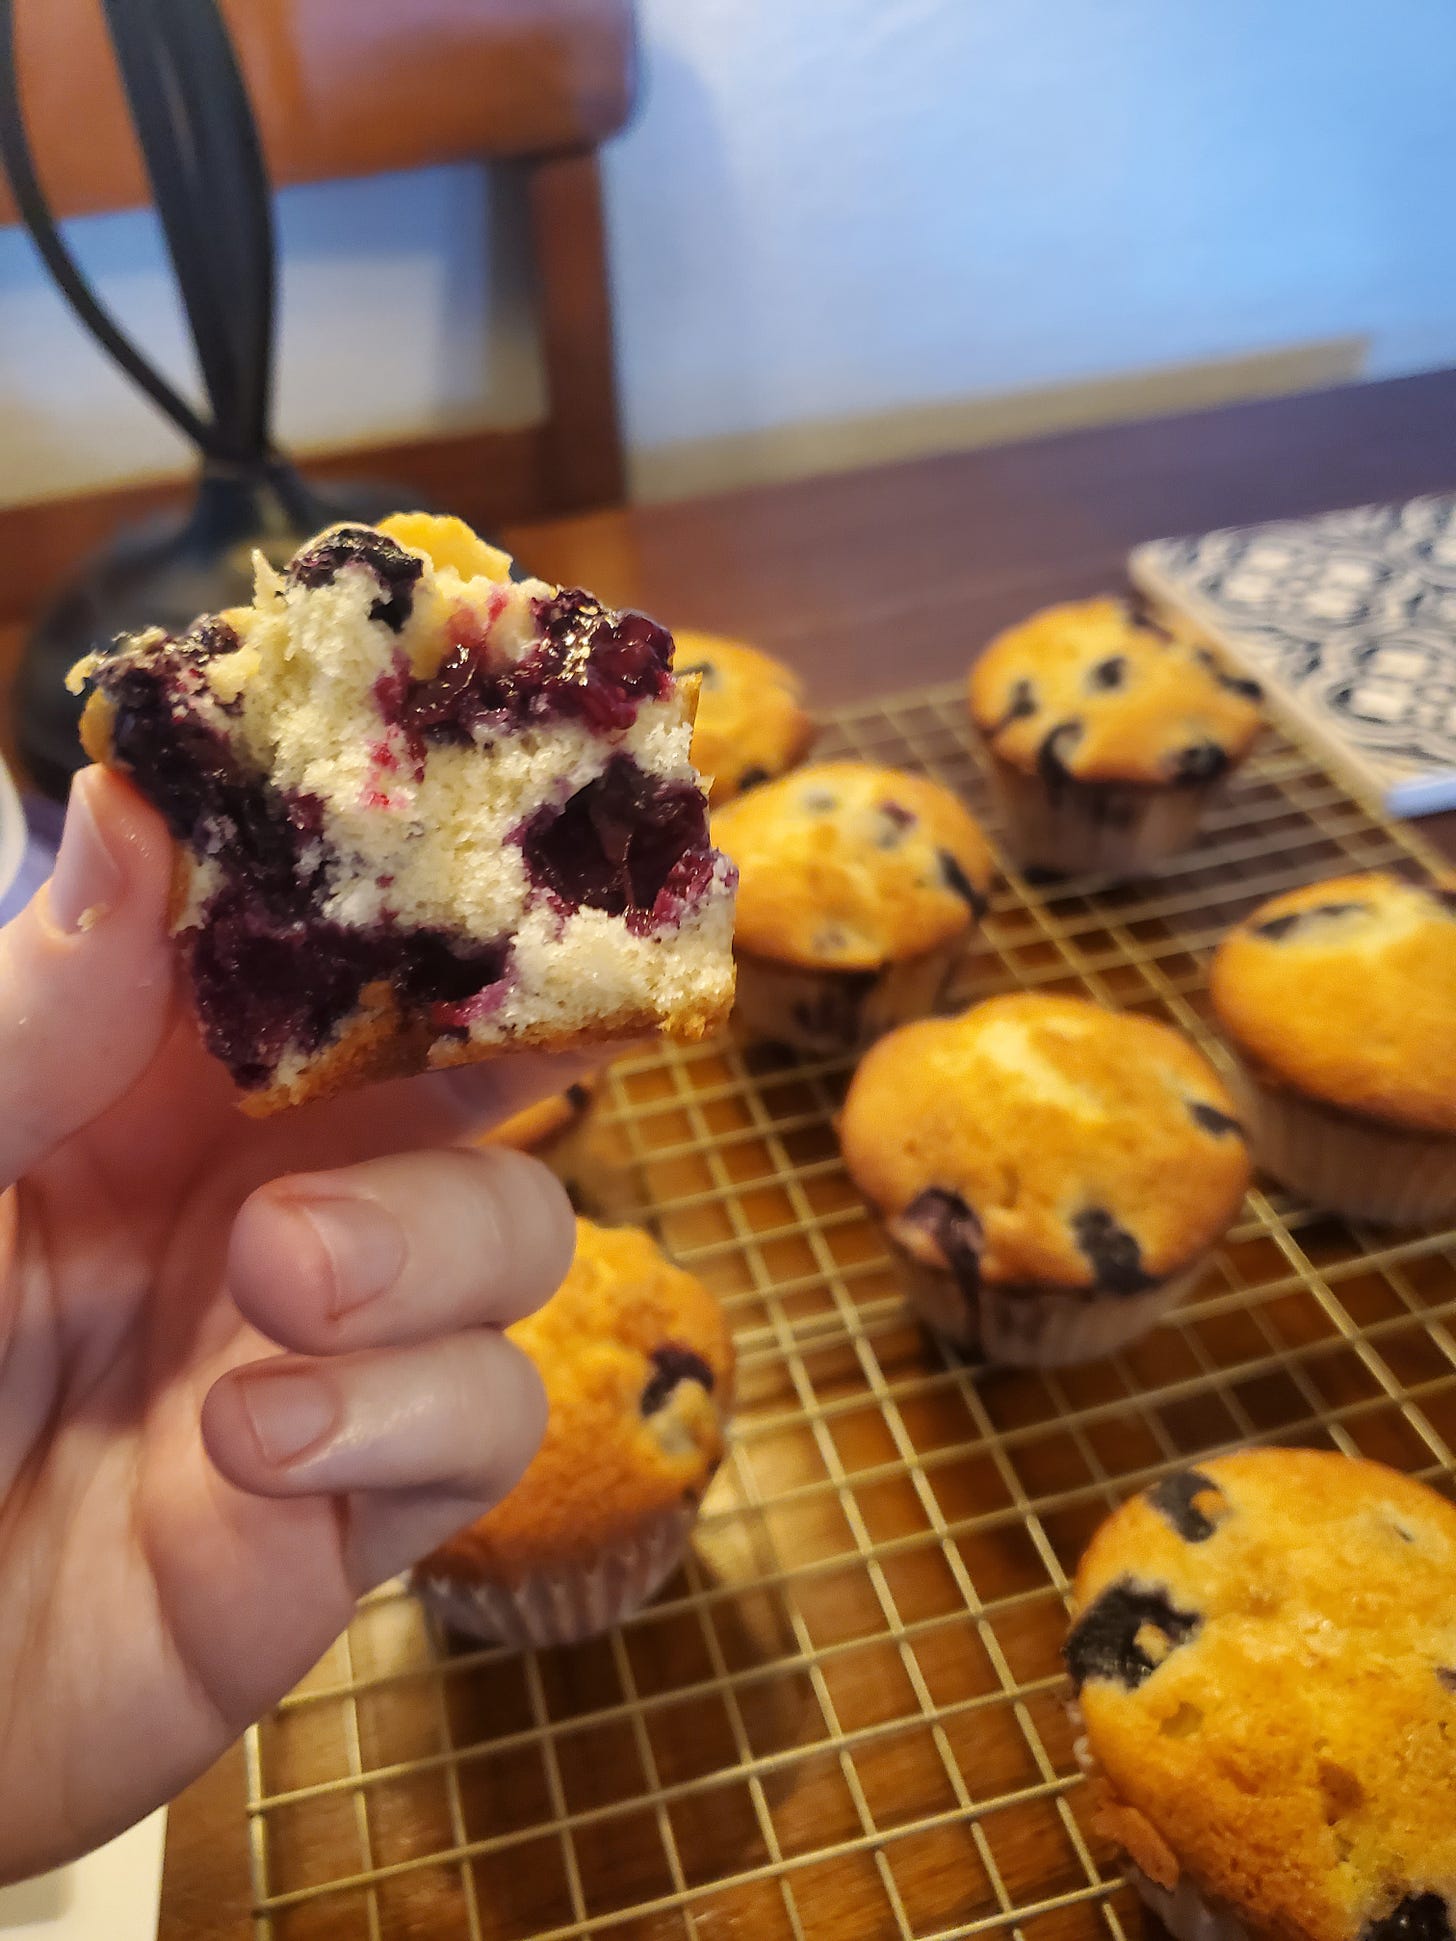 A close up image of half of a blueberry muffin. Other muffins sit on a golden cooling rack in the background, out of focus.